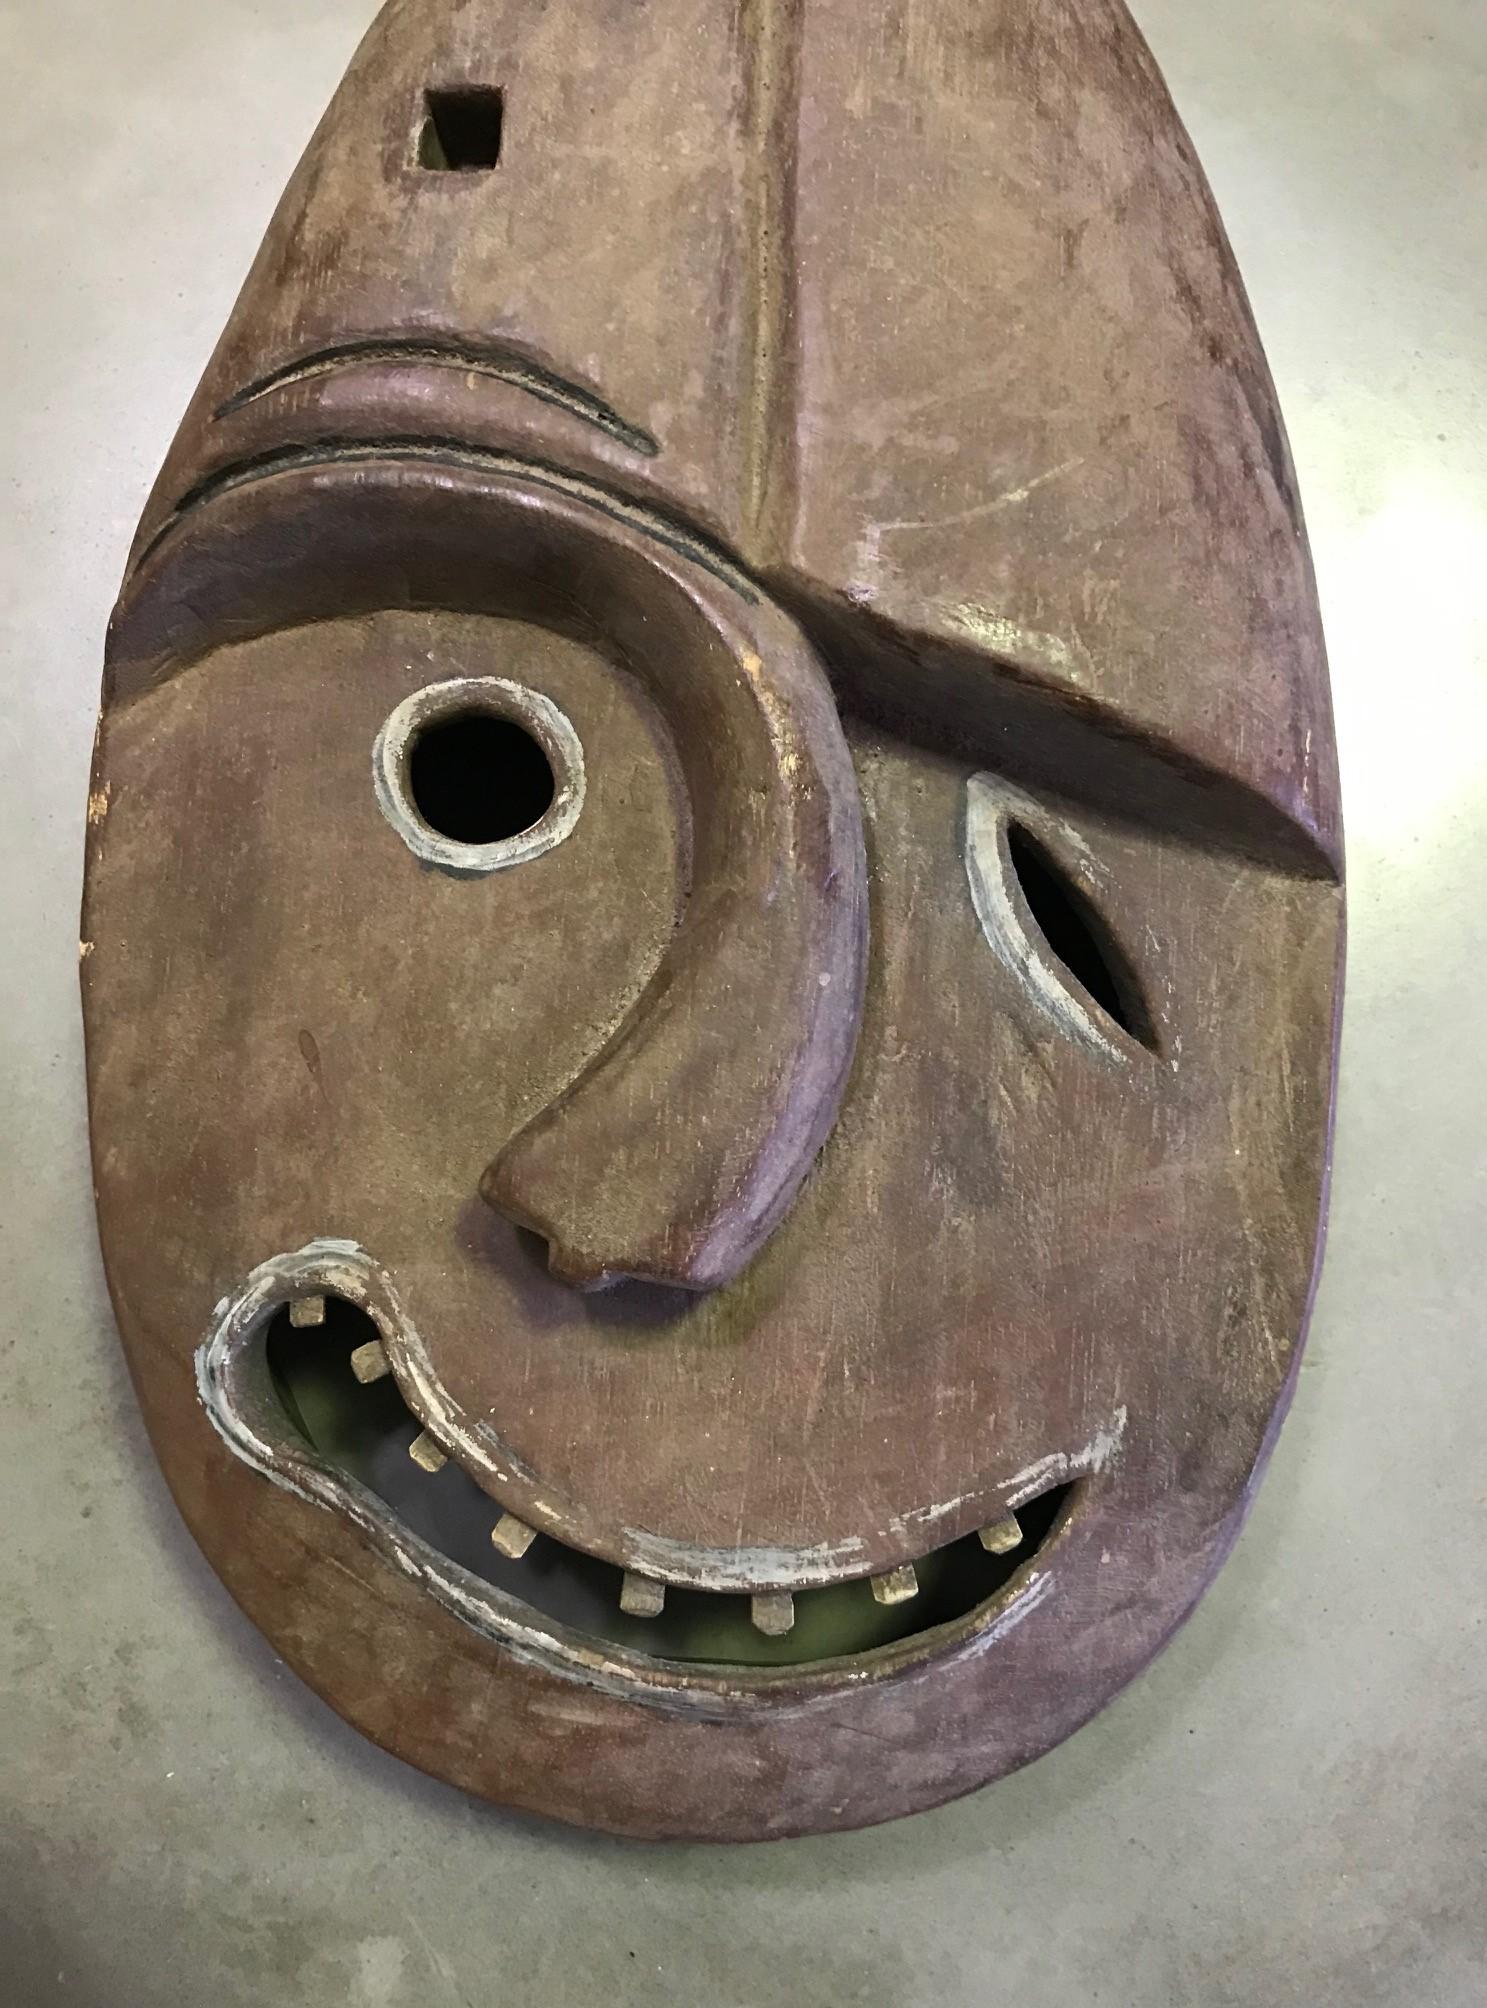 A beautiful, somewhat strange and grotesque mask by the Yup'ik (Yupik) aboriginal, indigenous people of South-Western & South Central Alaska. The Yup'ik people, who are related to the Inuit peoples, have a long history of ceremonial mask making.